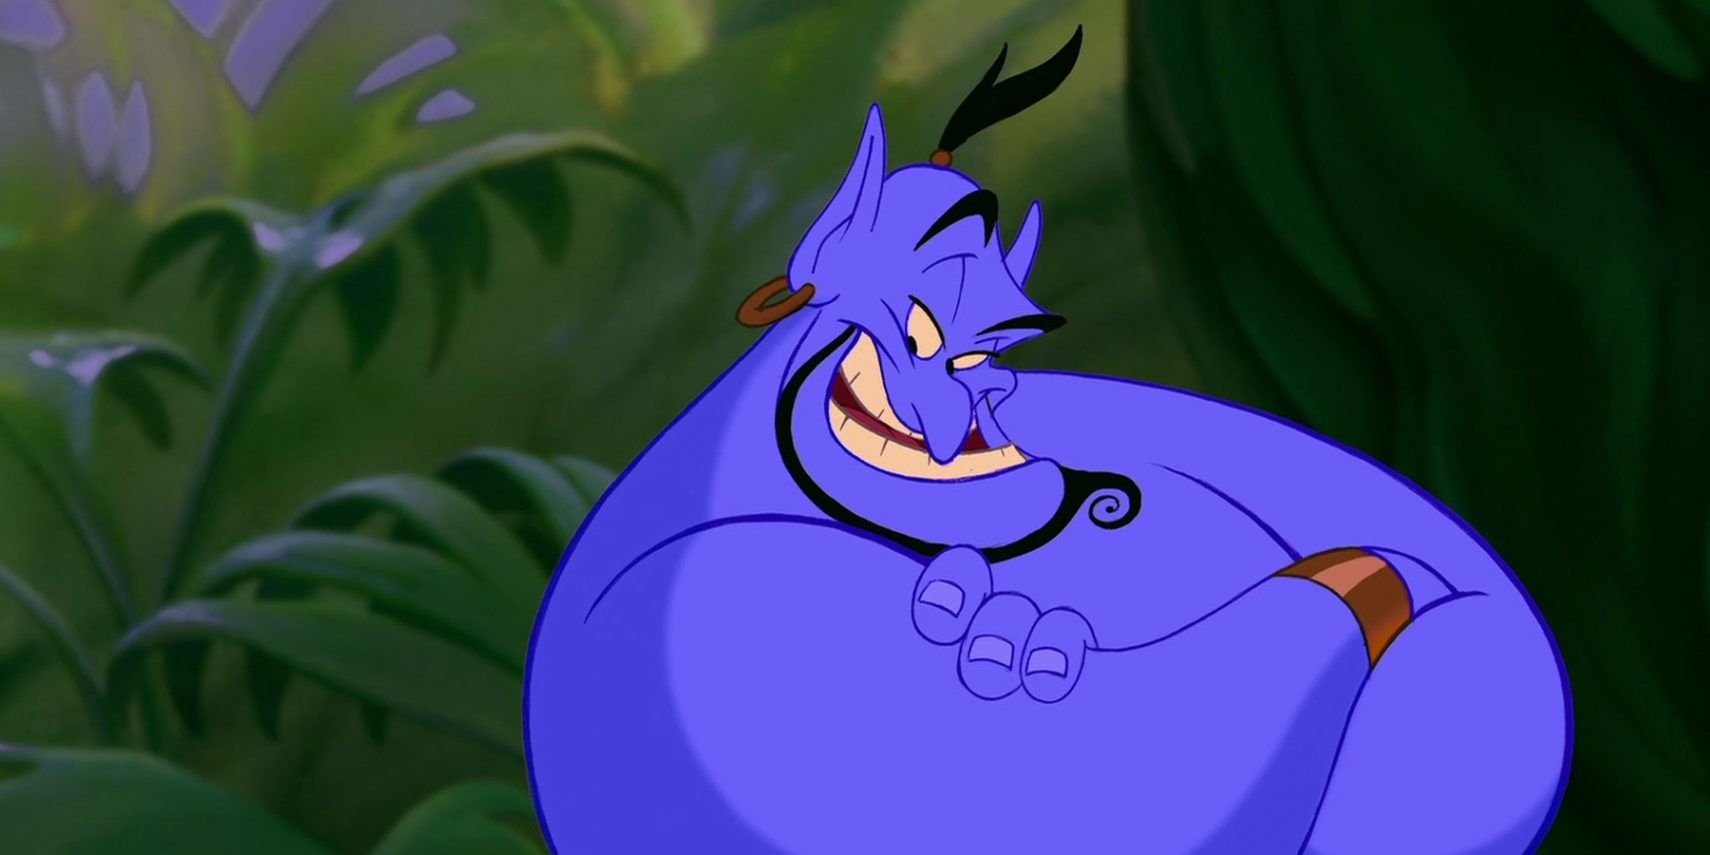 10 Of Robin Williams's Funniest Characters, Ranked